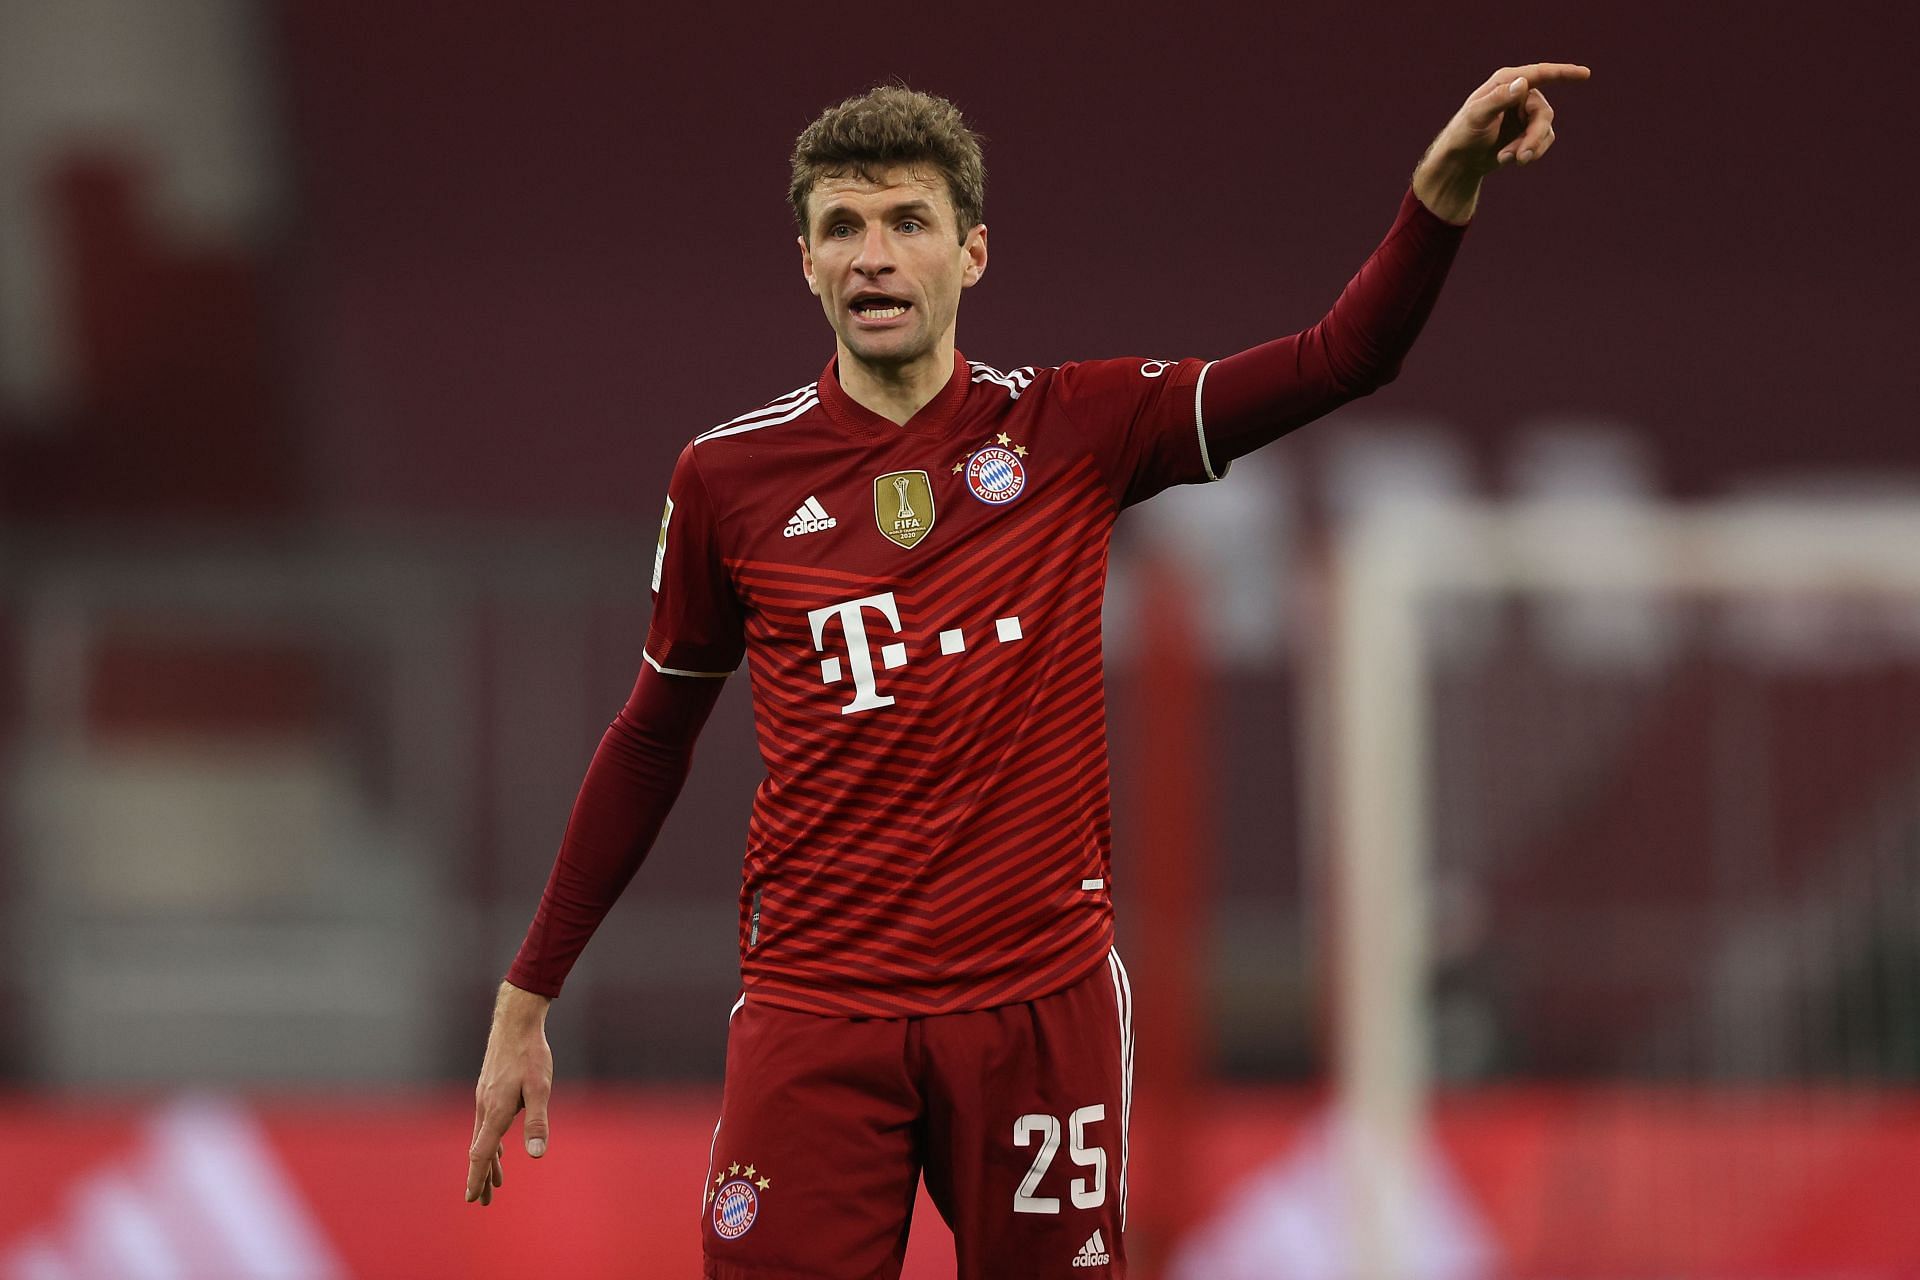 Muller has been one of the best assist-providers in the game for the last few seasons.